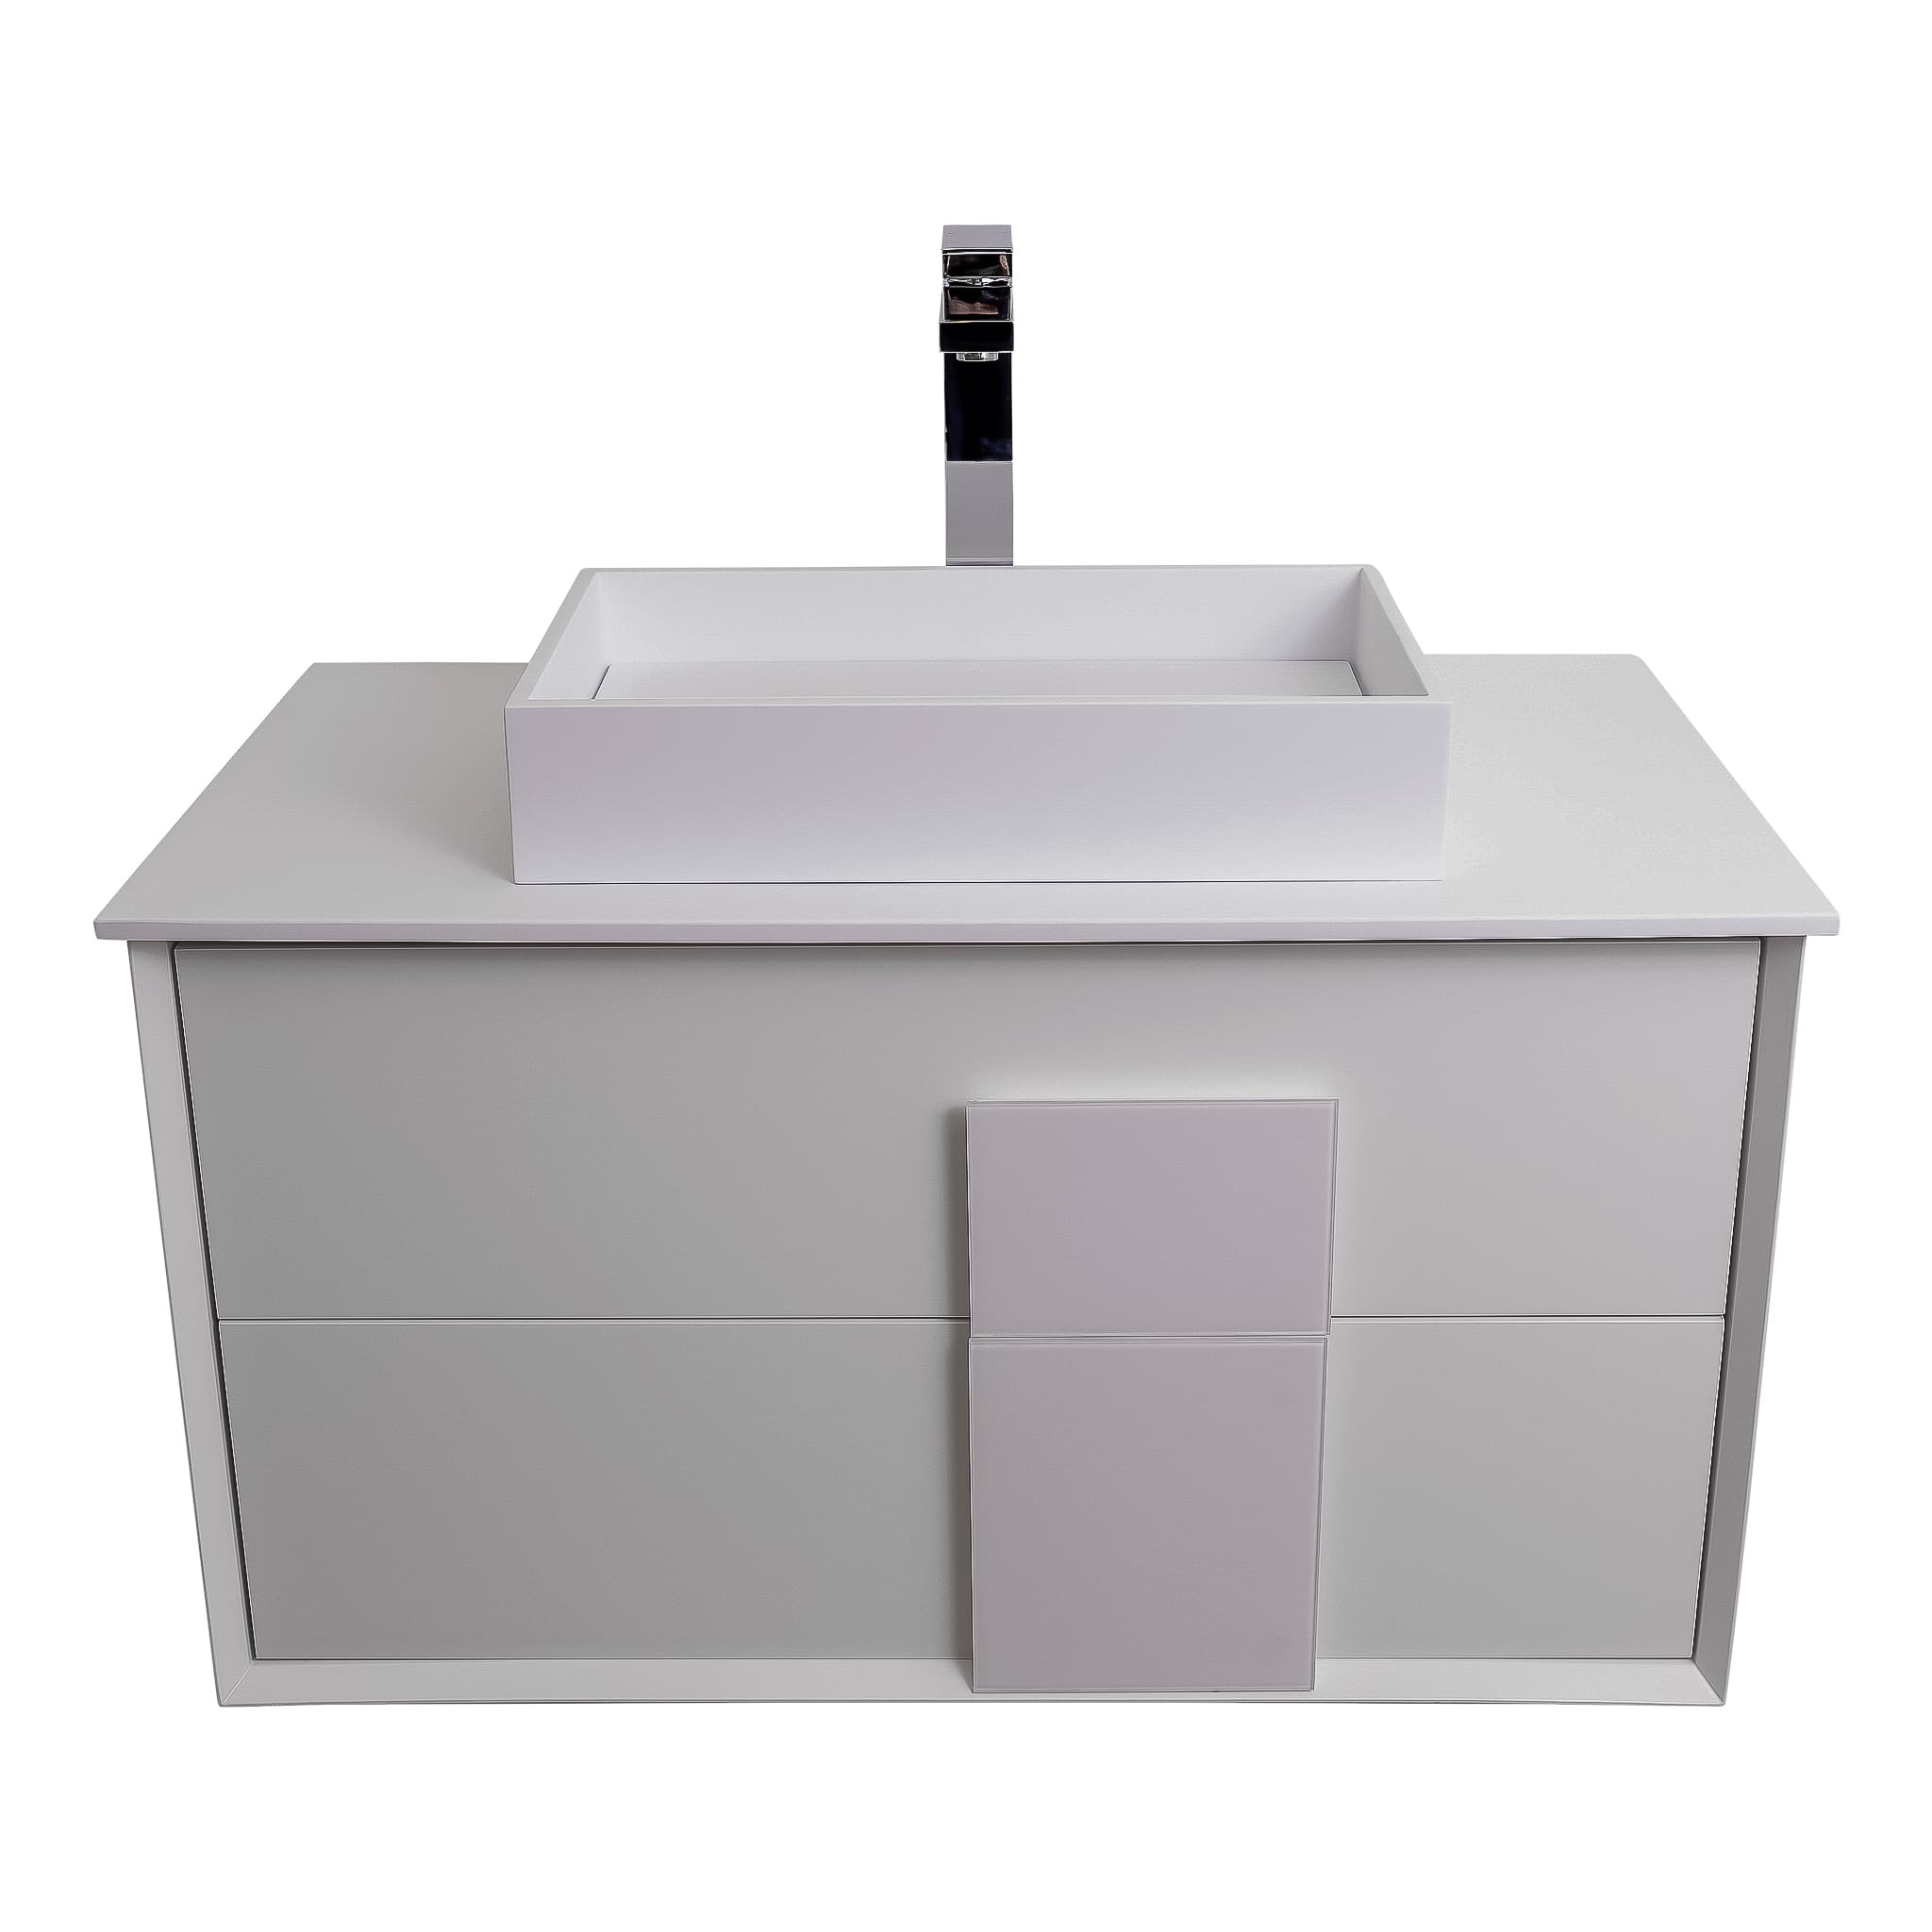 Piazza 31.5 Matte White With White Handle Cabinet, Solid Surface Flat White Counter and Infinity Square Solid Surface White Basin 1329, Wall Mounted Modern Vanity Set